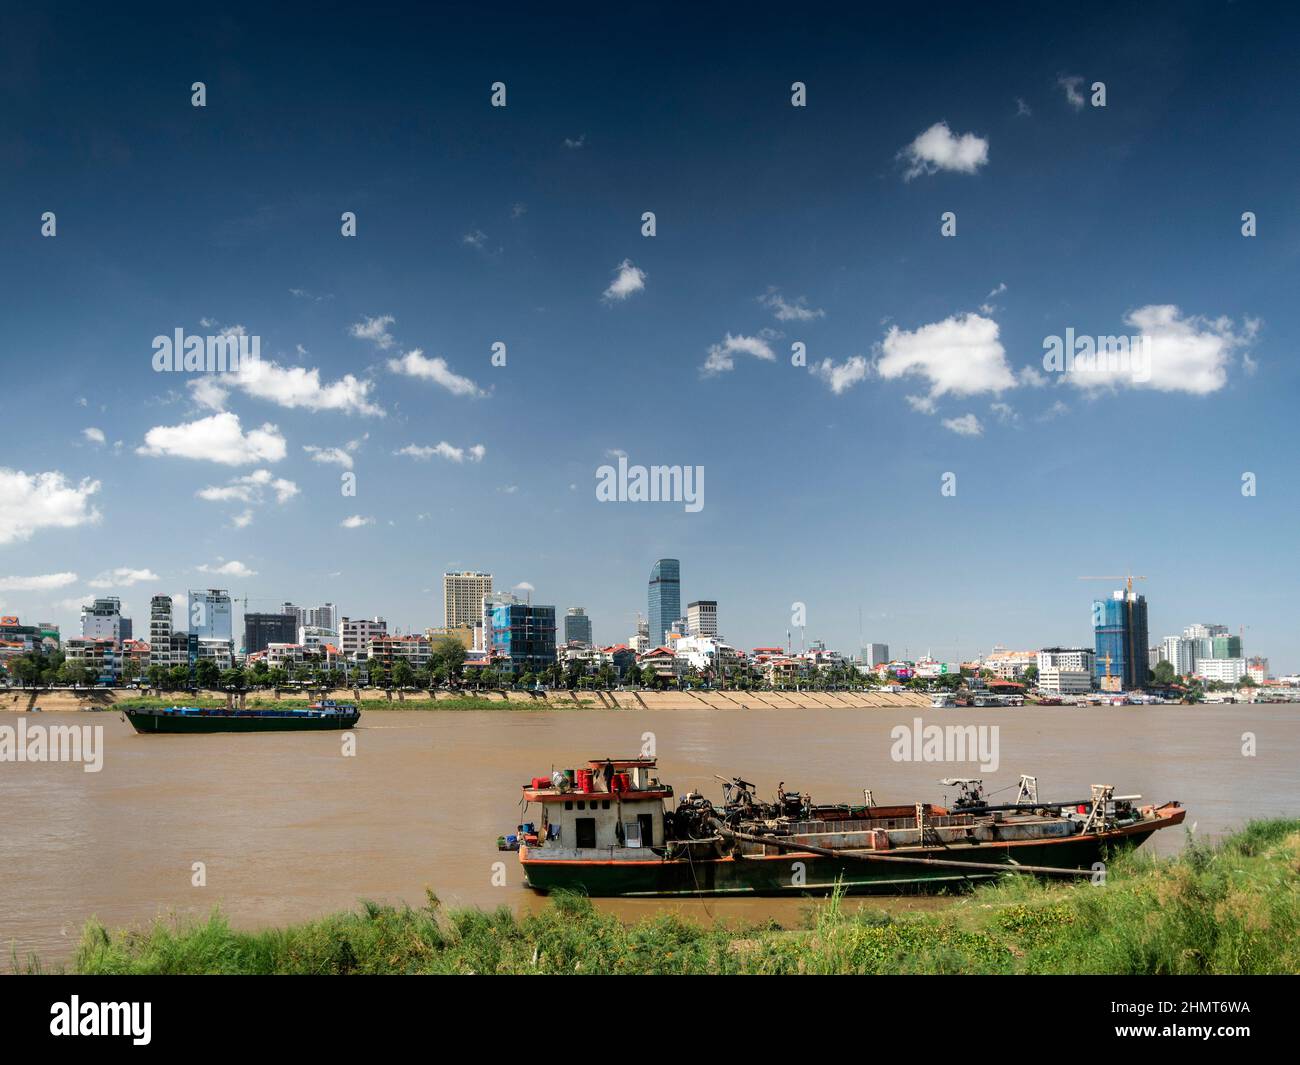 sand dredging boats on the Tonle Sap river with Phnom Penh city skyline in Cambodia Stock Photo